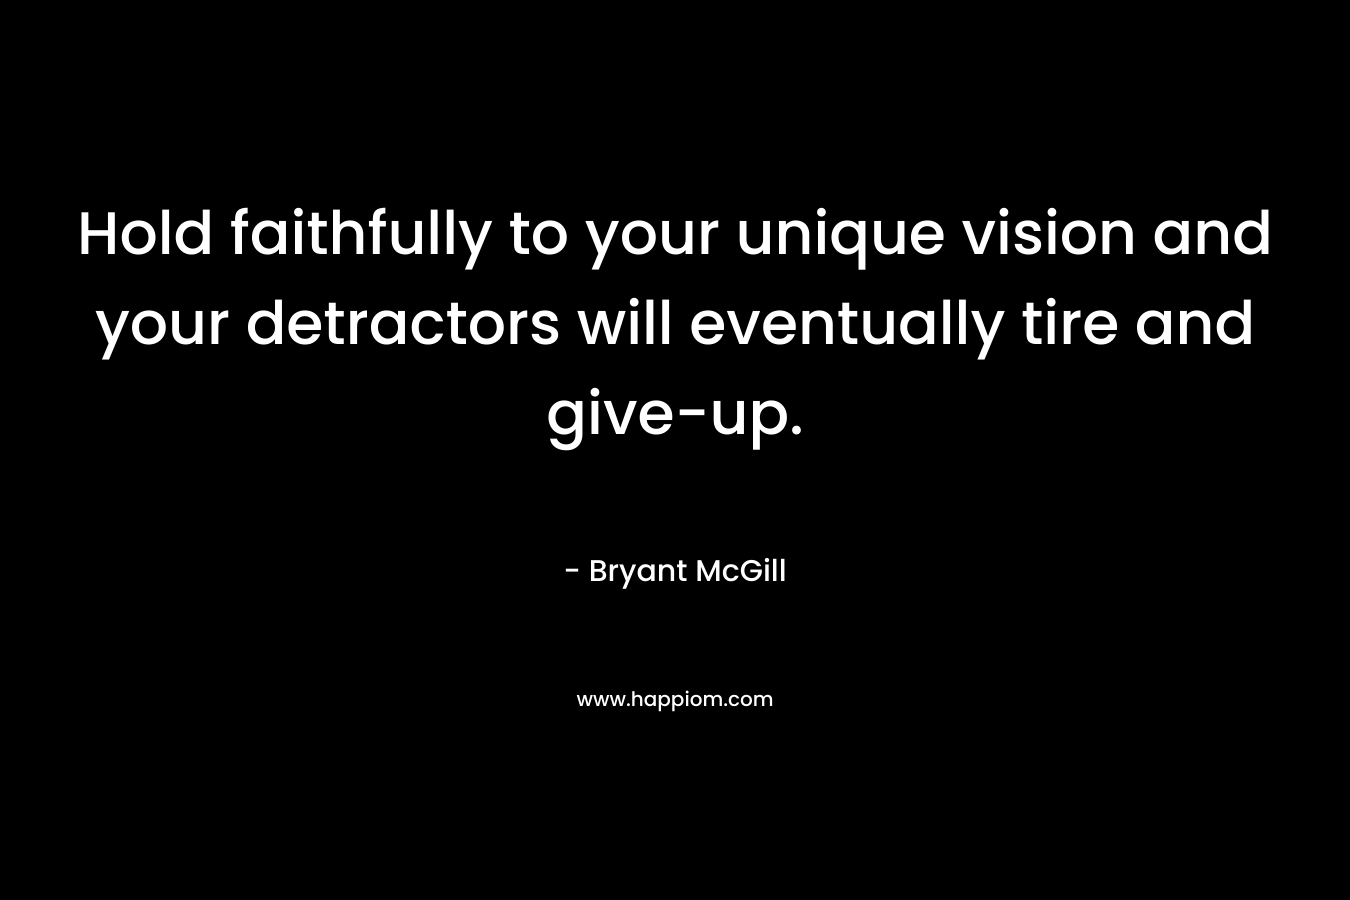 Hold faithfully to your unique vision and your detractors will eventually tire and give-up.